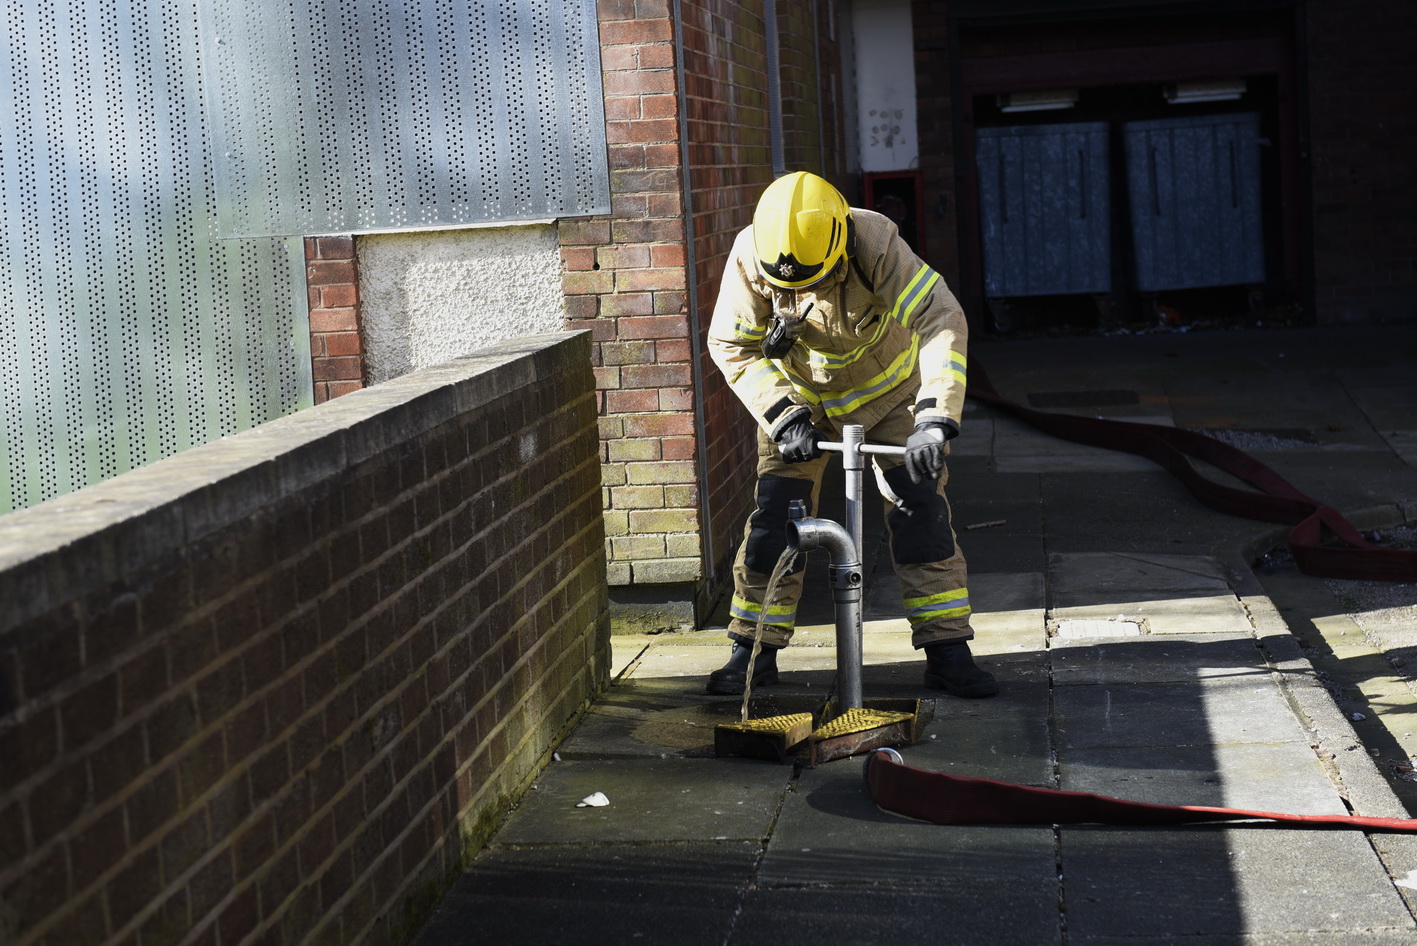 Fire and rescue exercise in Merseyside photos